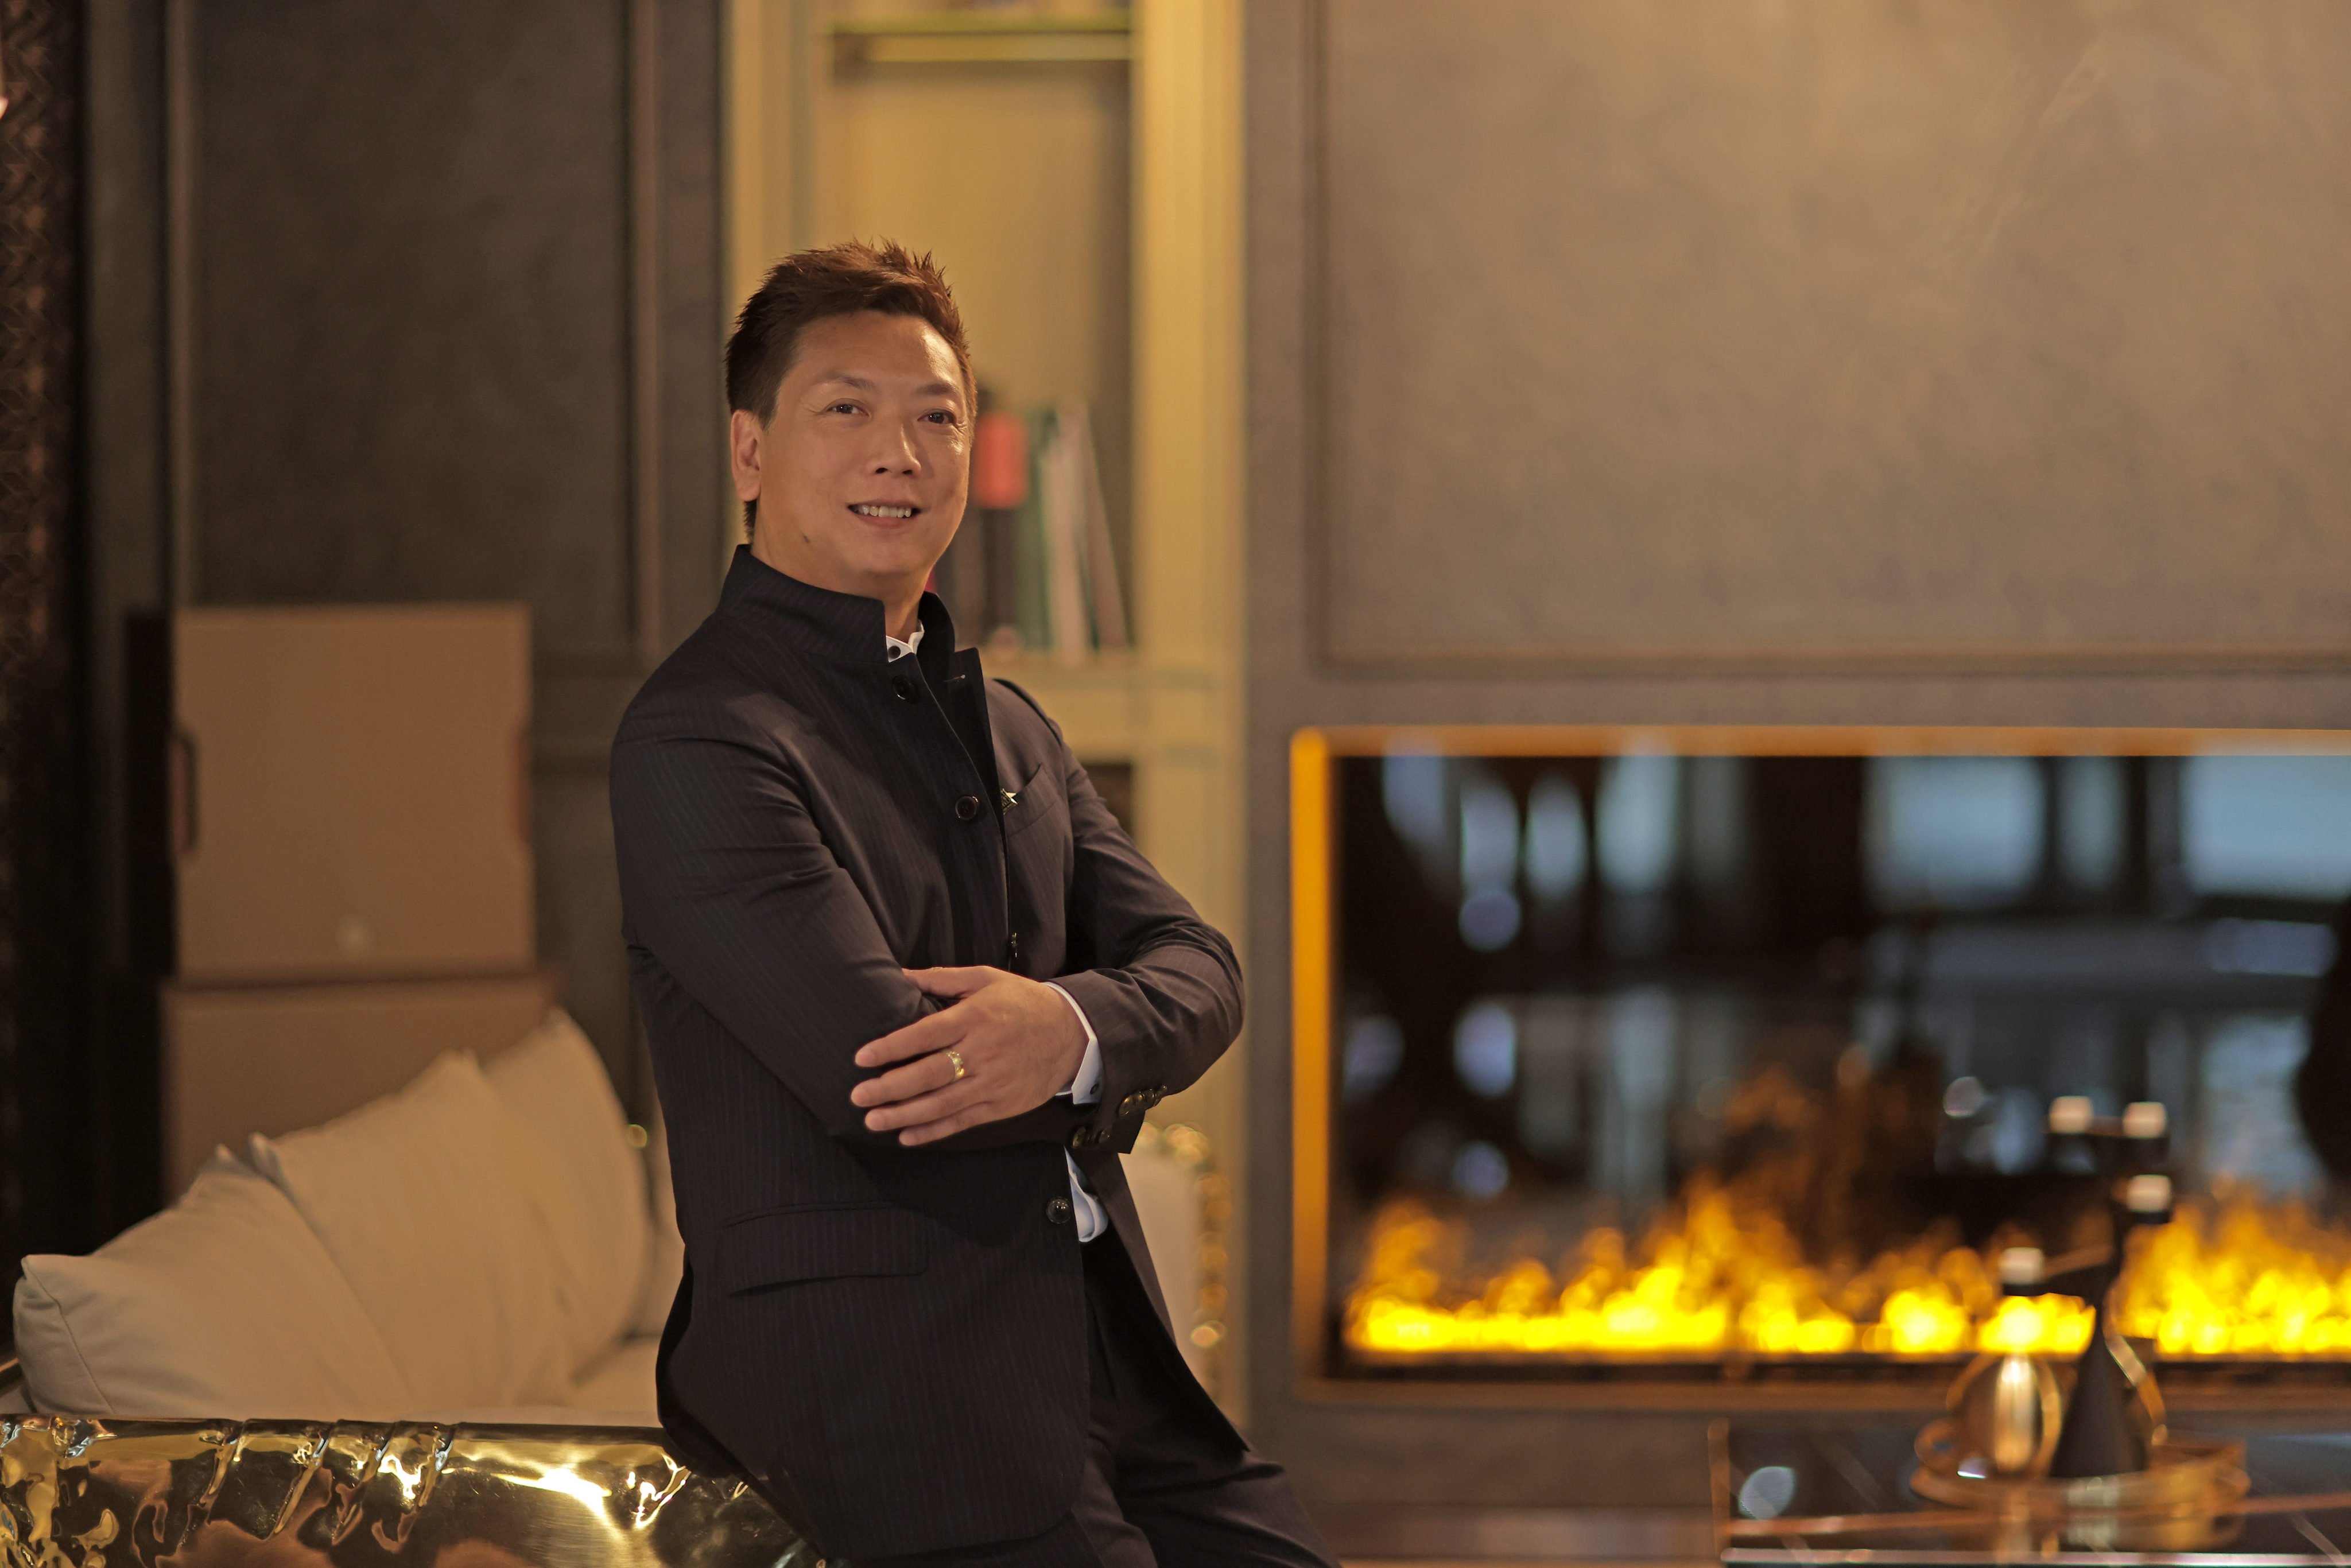 Mark Wong at Art Paradiso, a Small Luxury Hotels of the World property in Incheon, South Korea. Photo: Small Luxury Hotels of the World